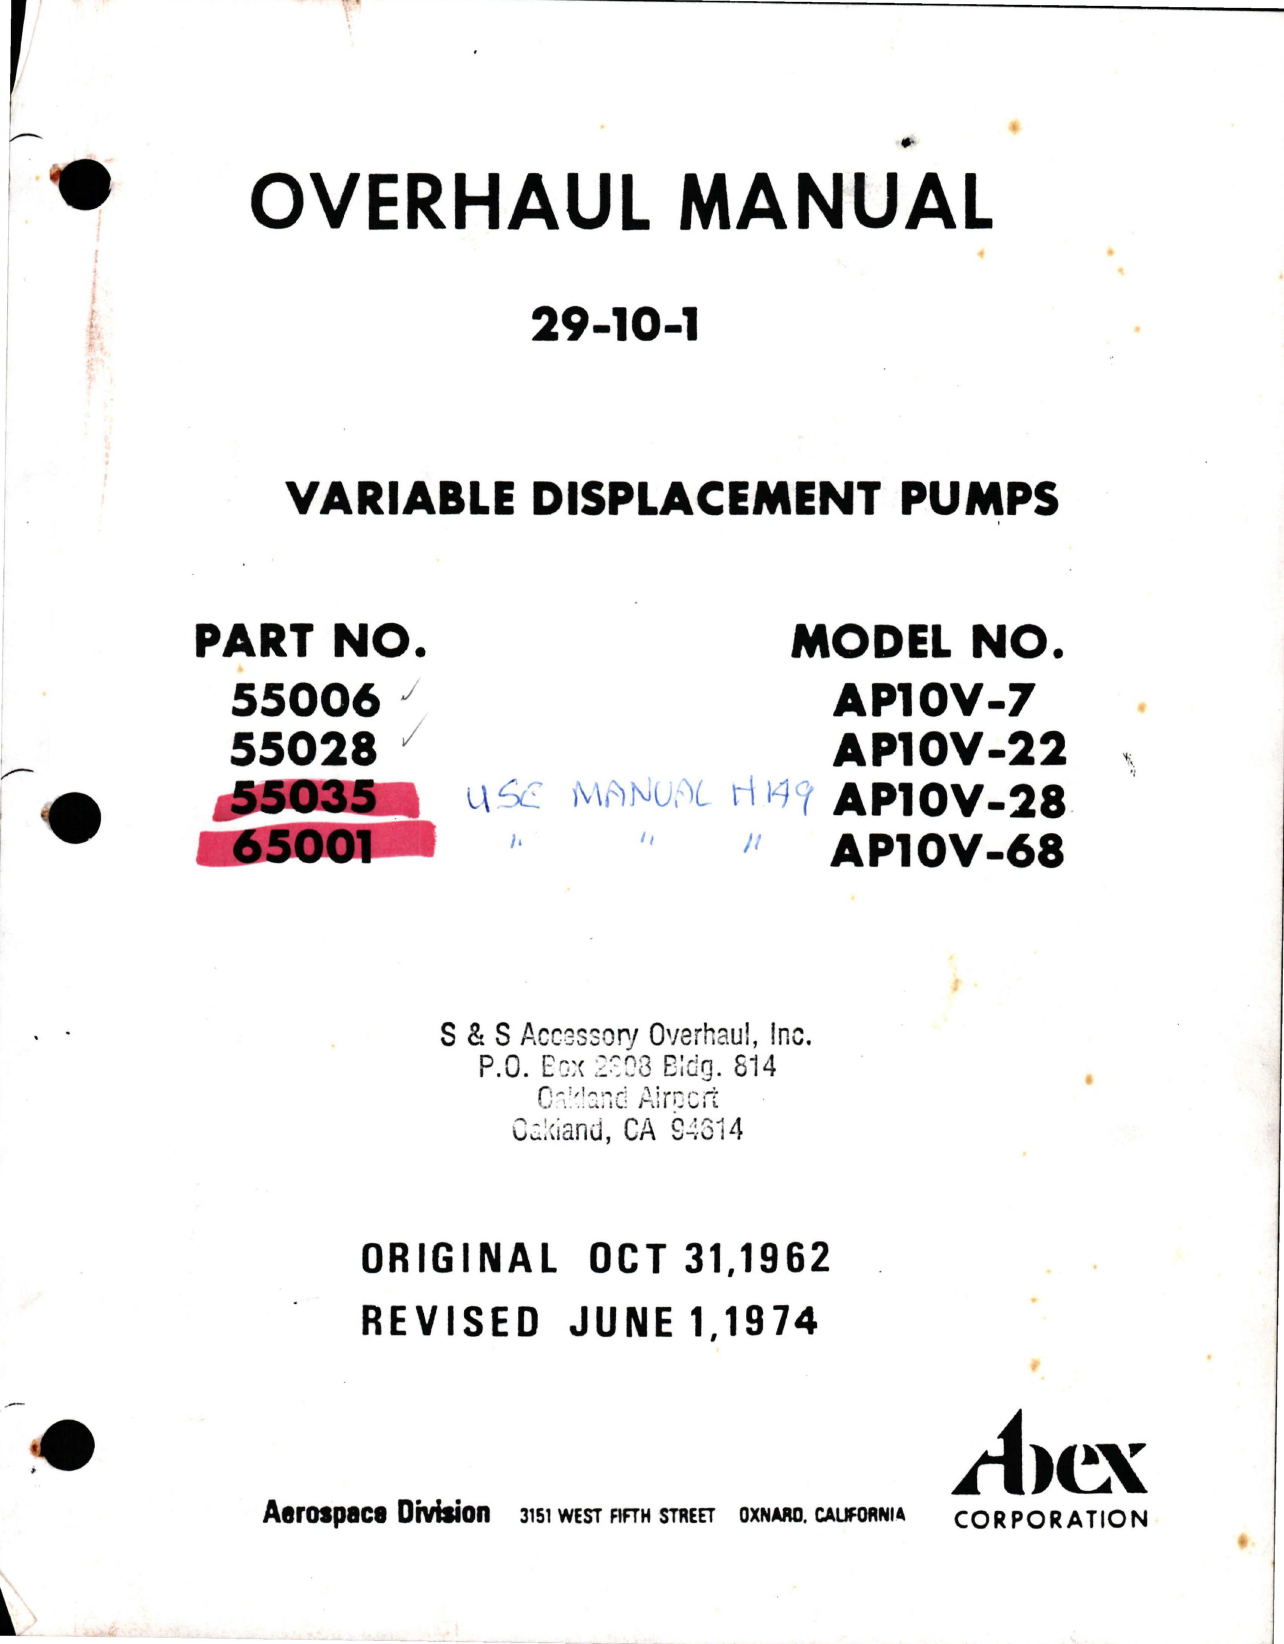 Sample page 1 from AirCorps Library document: Overhaul Manual for Variable Displacement Pumps - Parts 55006, 55028, 55035, and 65001